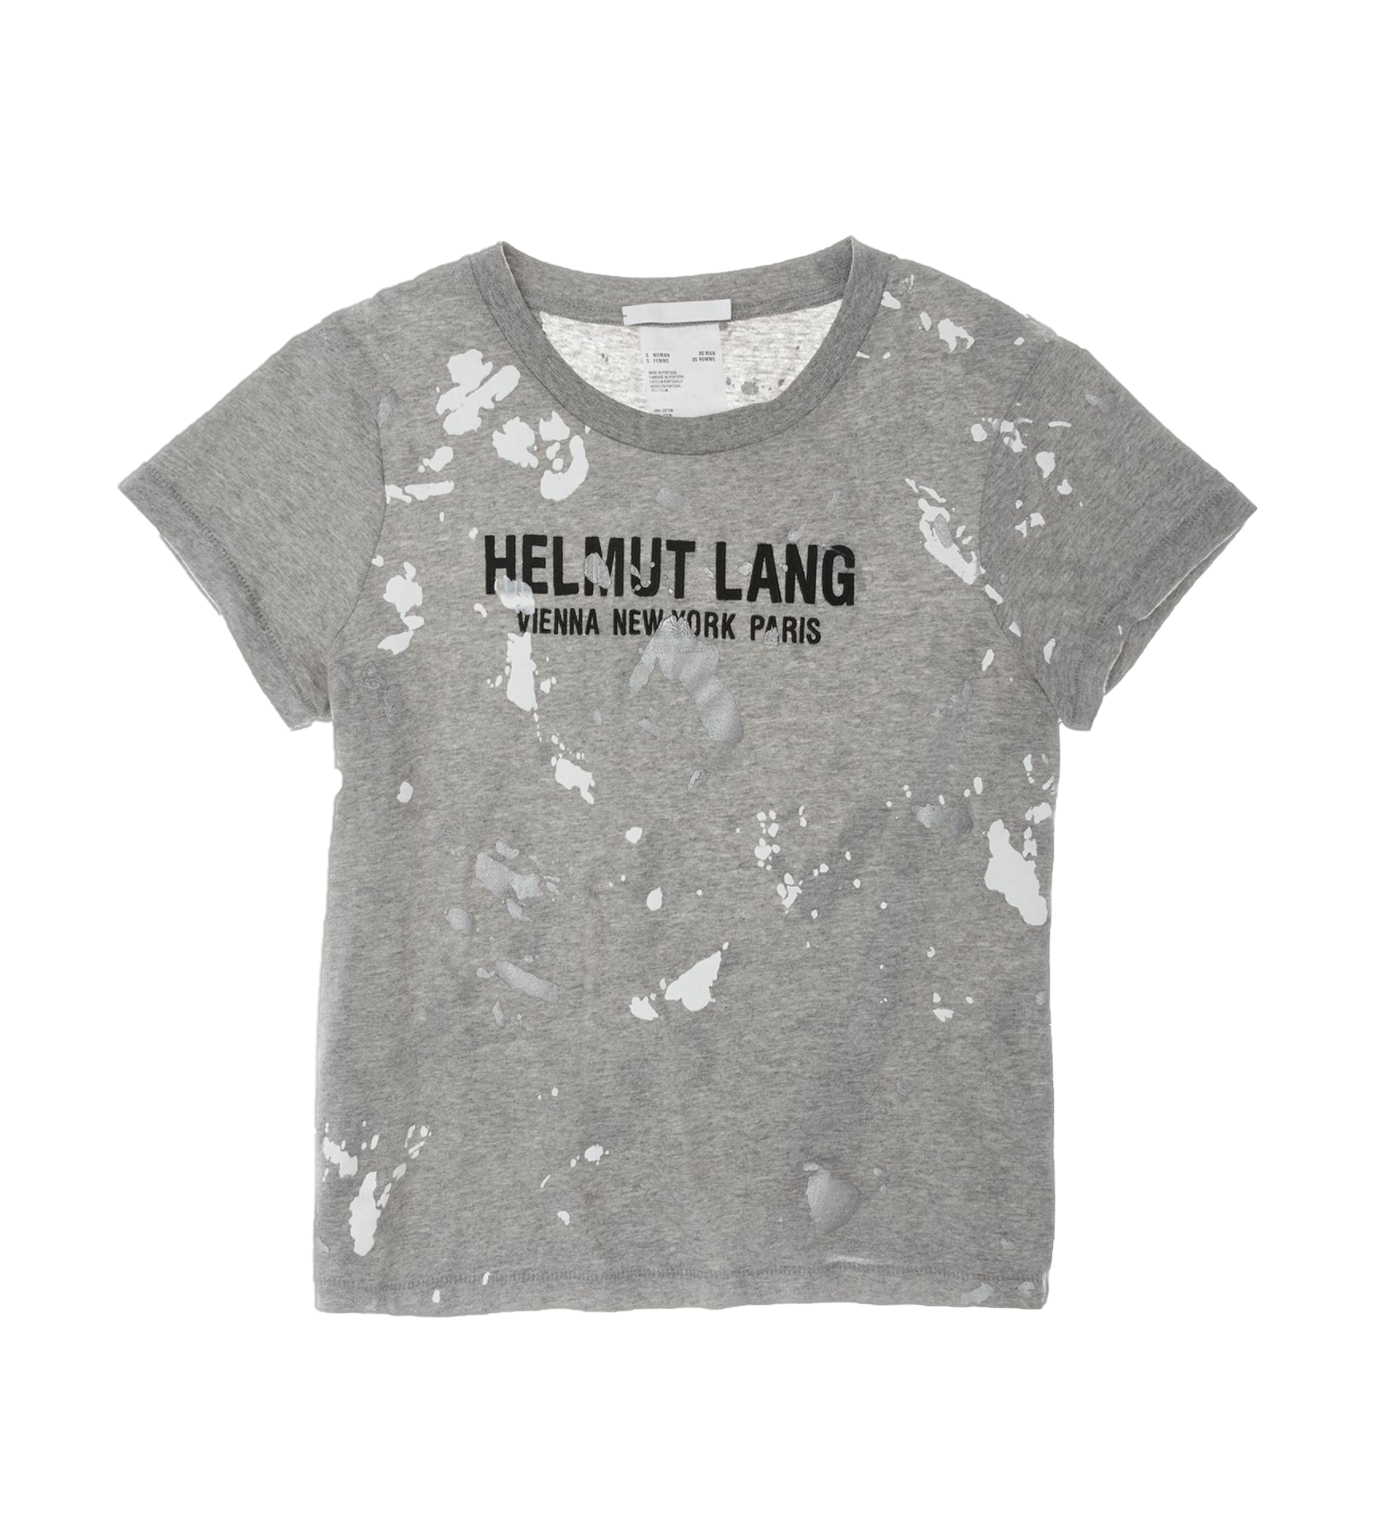 Helmut Lang Baby Painter Tee - Size L